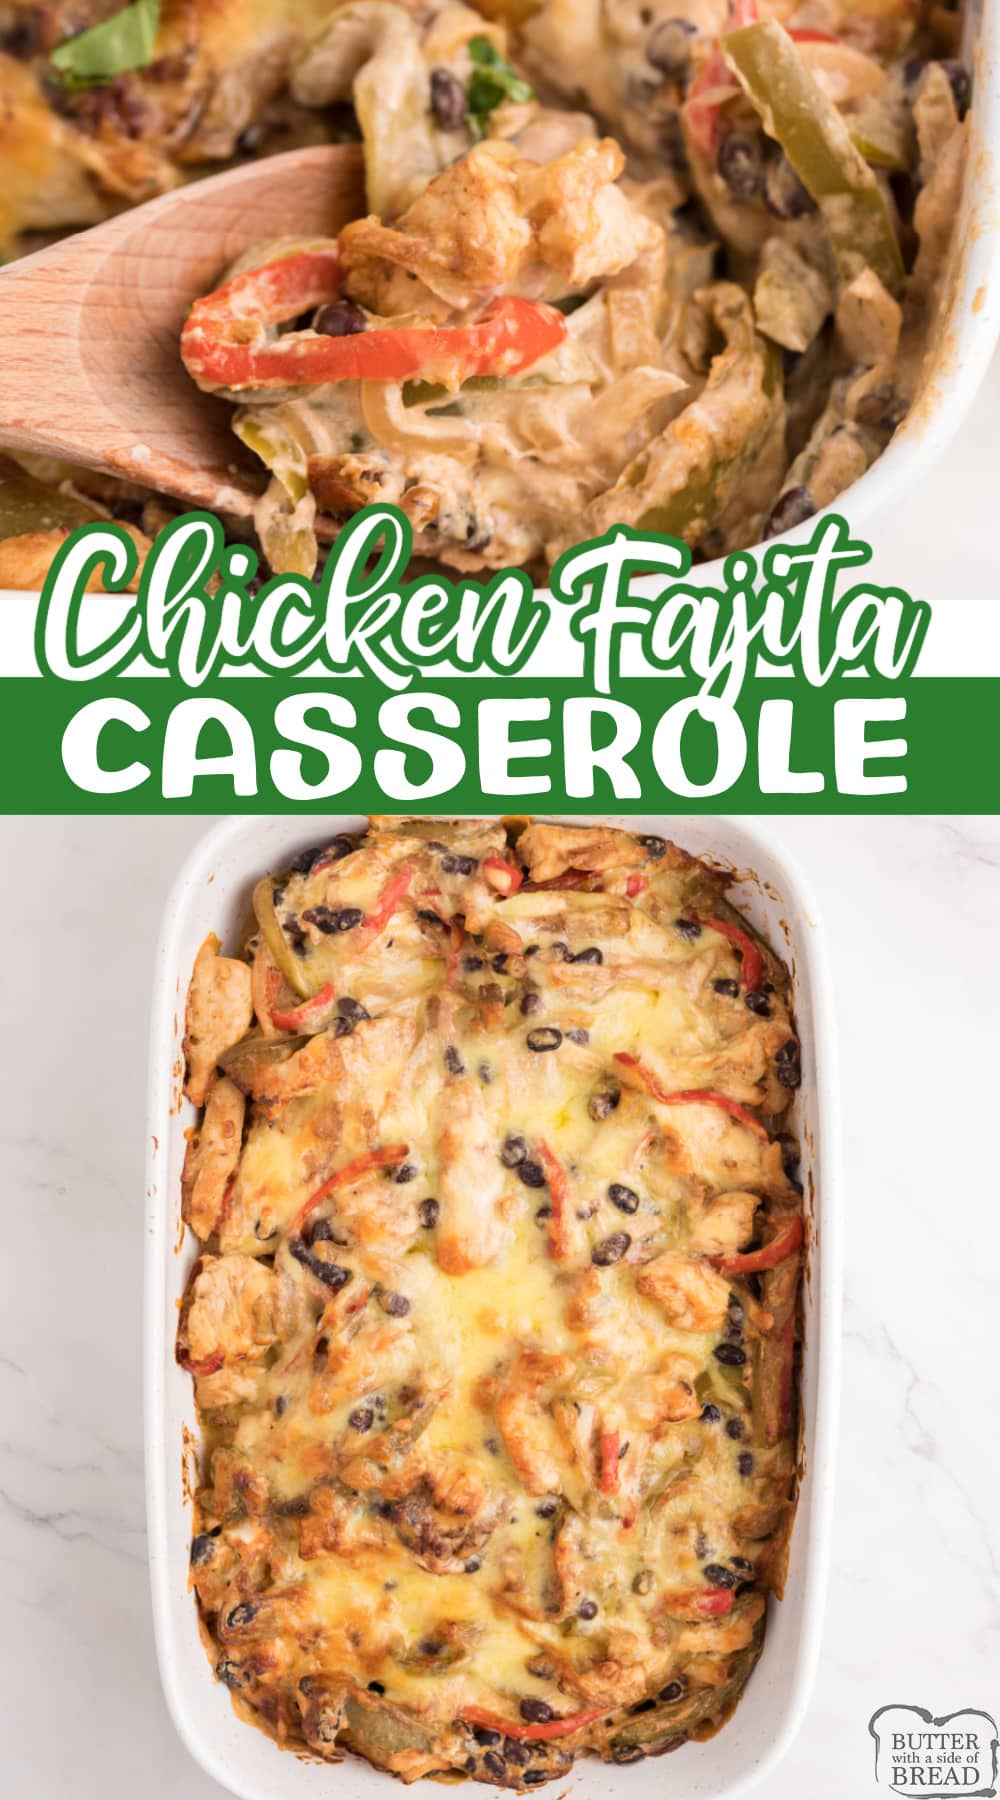 Chicken Fajita Casserole combines the flavors of chicken fajitas in a delicious casserole.  Chicken, peppers, onions and black beans are combined with a creamy cheese mixture before being baked to perfection.